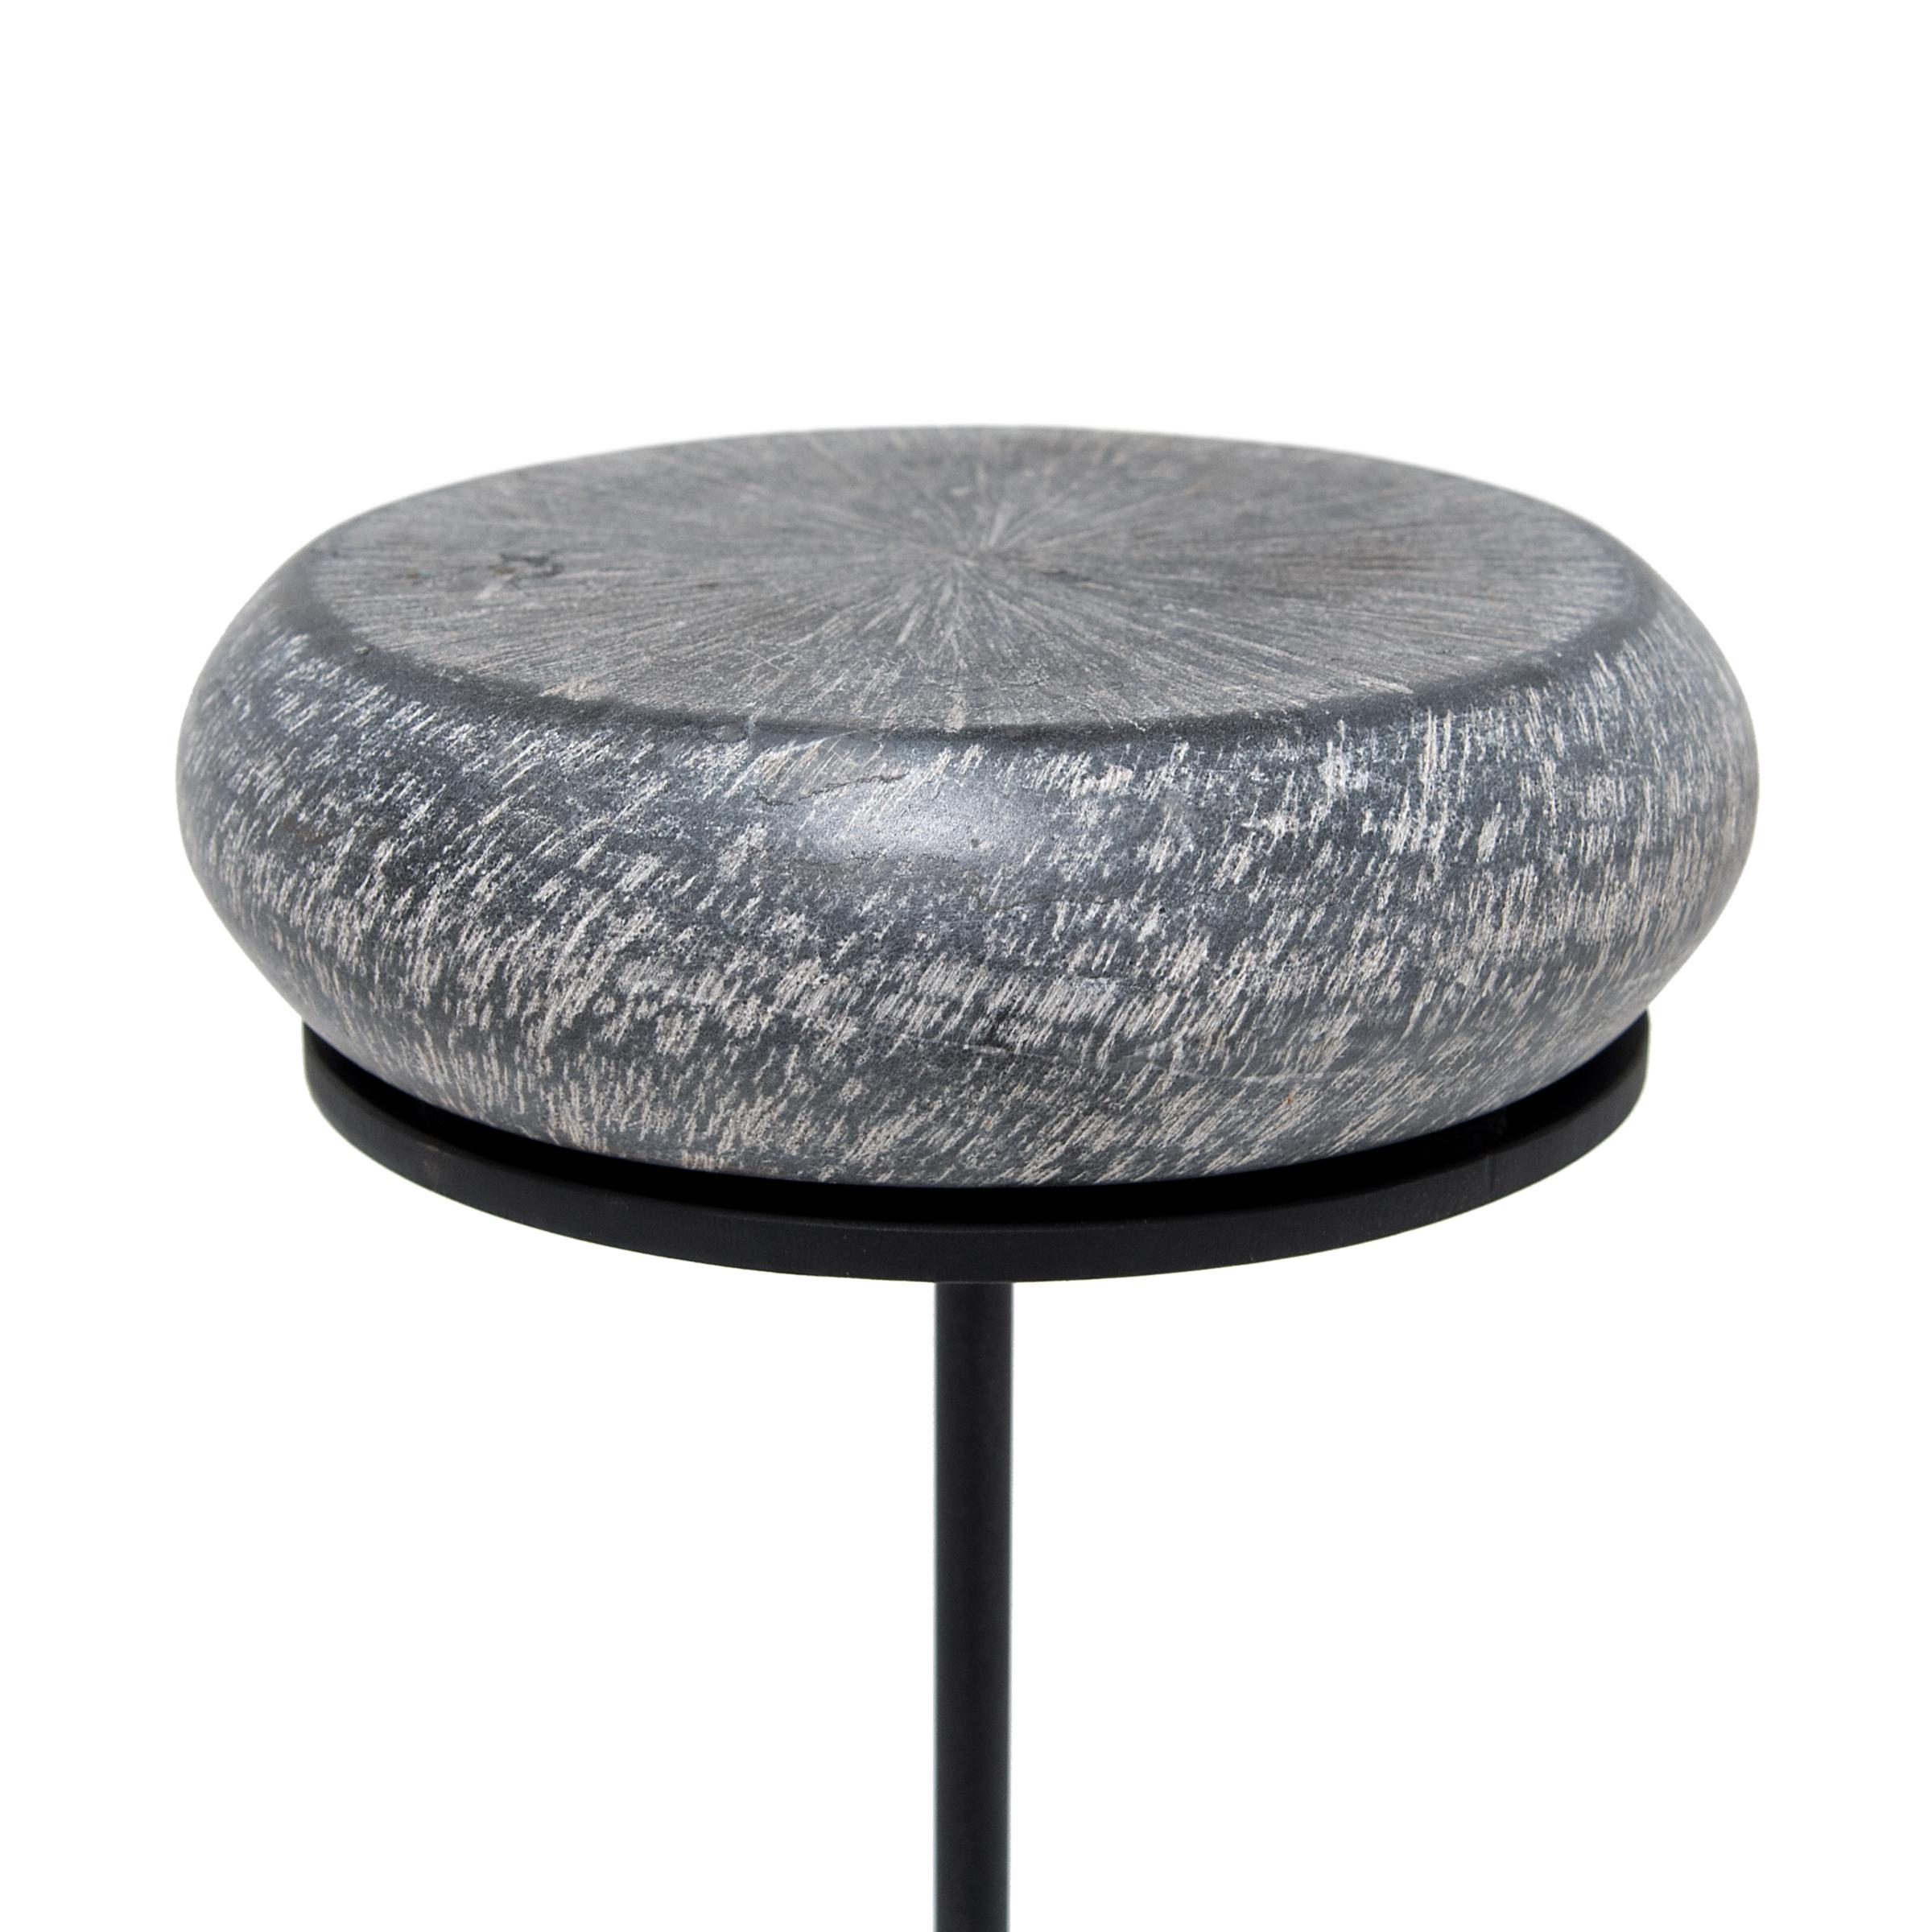 The stone top of this petite drum table references the form of a traditional hand held fish drum. In Taoist mythology the fish drum was the symbol of Zhang Guolao, one of the mythical eight immortals. A storied eccentric, Zhang was believed to have